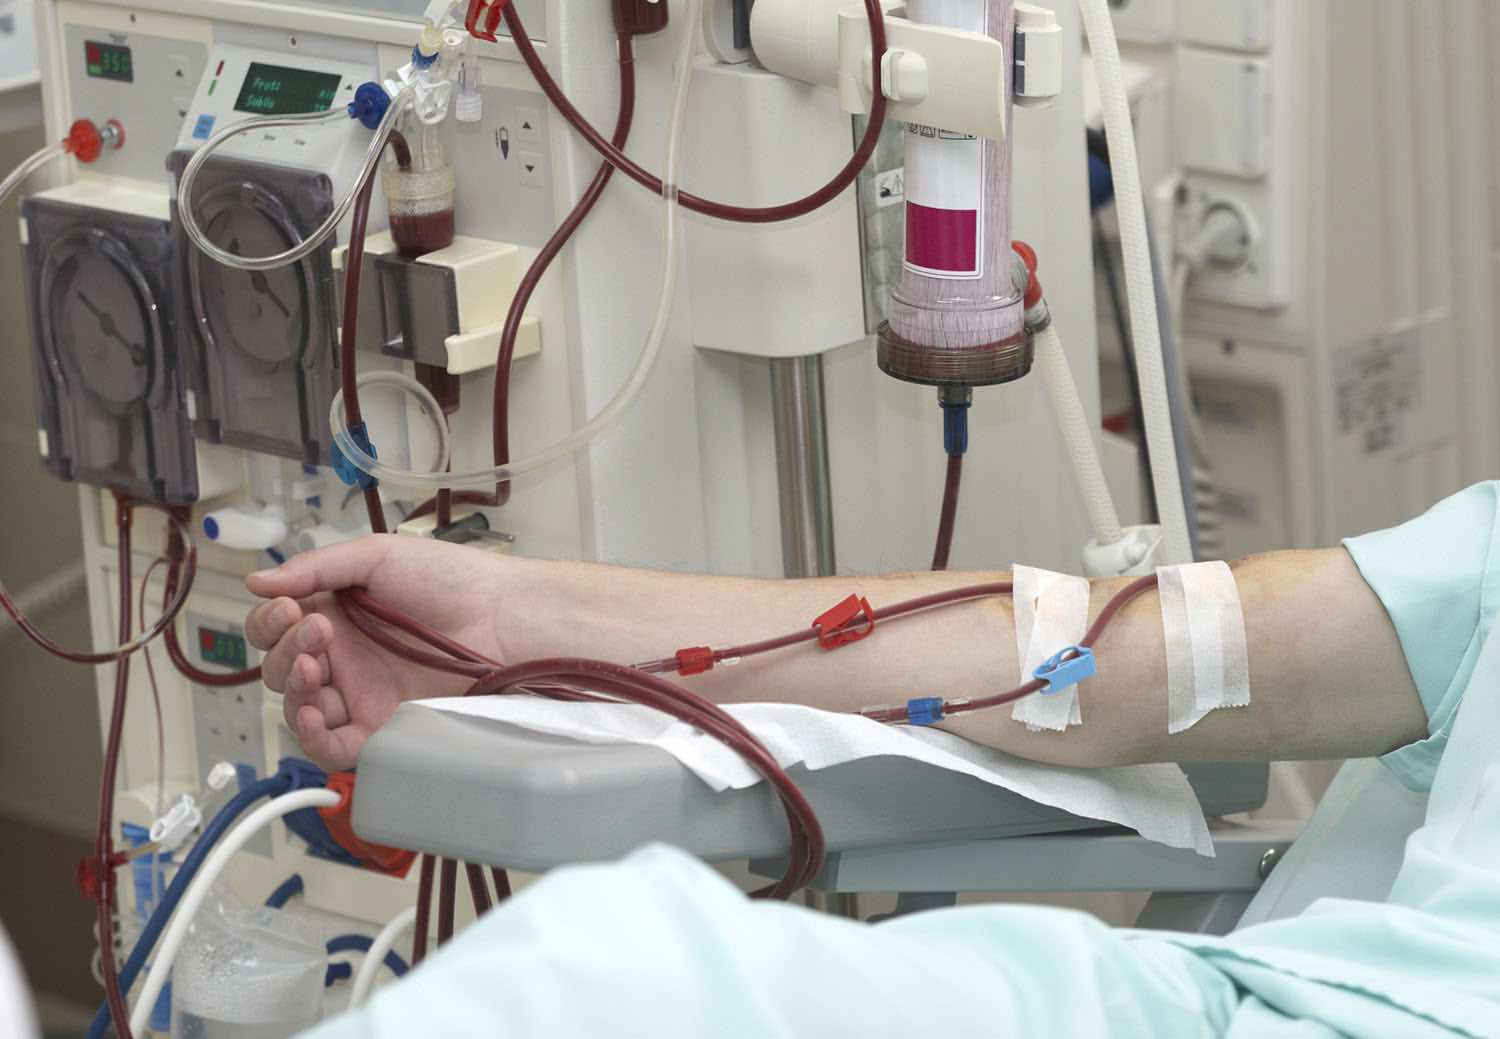 A dialysis patient's arm attached to a haemodialysis machine